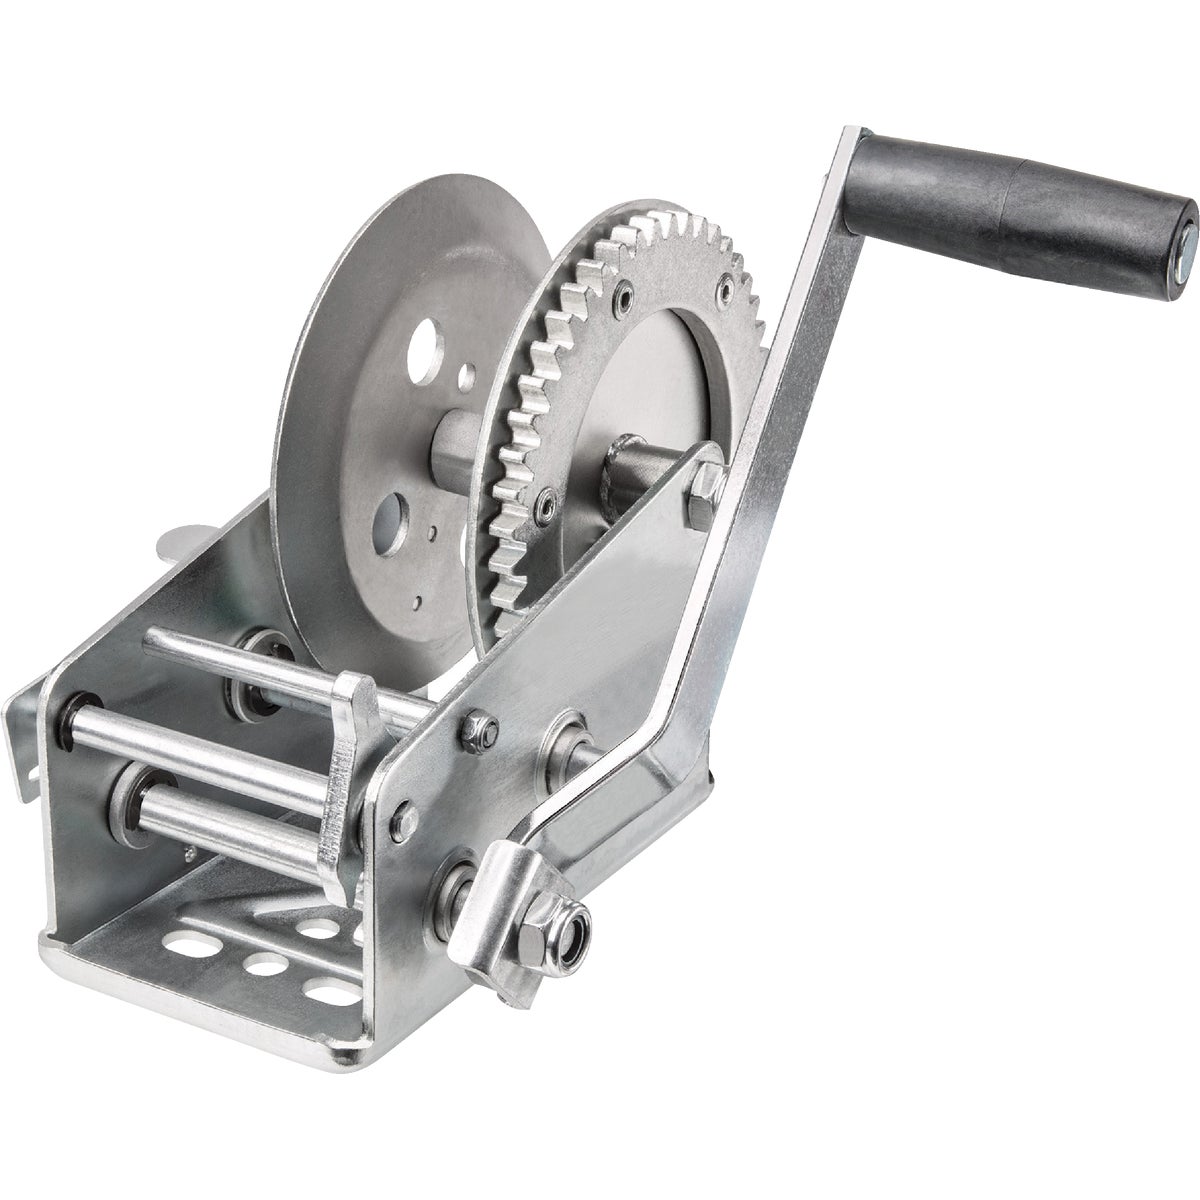 Reese Towpower 1800 Lb. Two-Speed Hand Winch